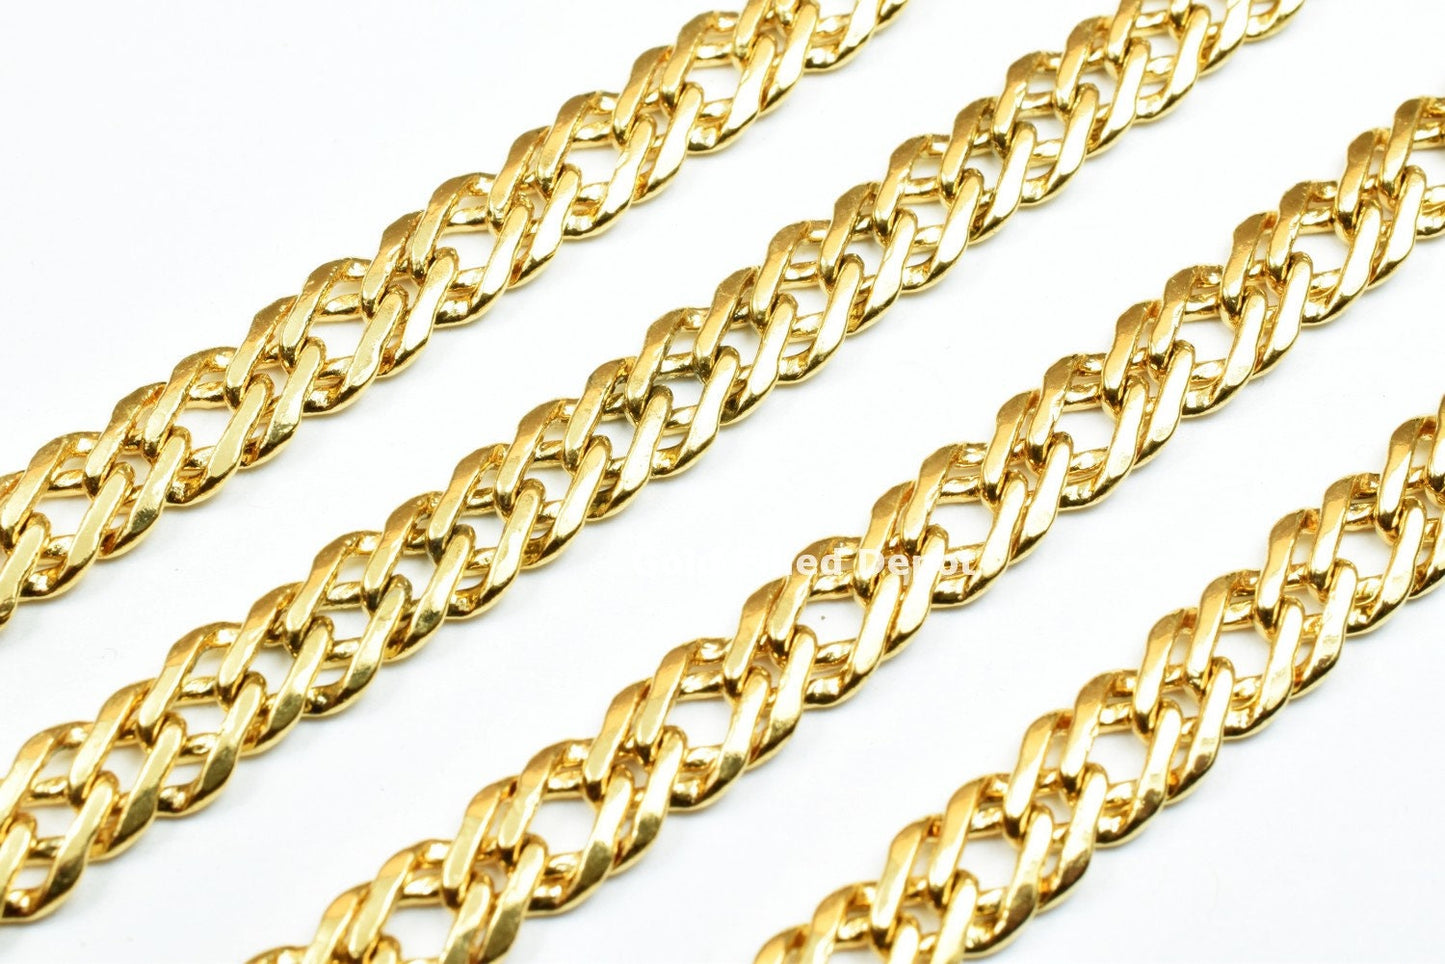 3 Foots 18K Gold Filled Chain Width 6mm Thickness 1.5mm Gold-Filled finding for Gold Filled Jewelry Making